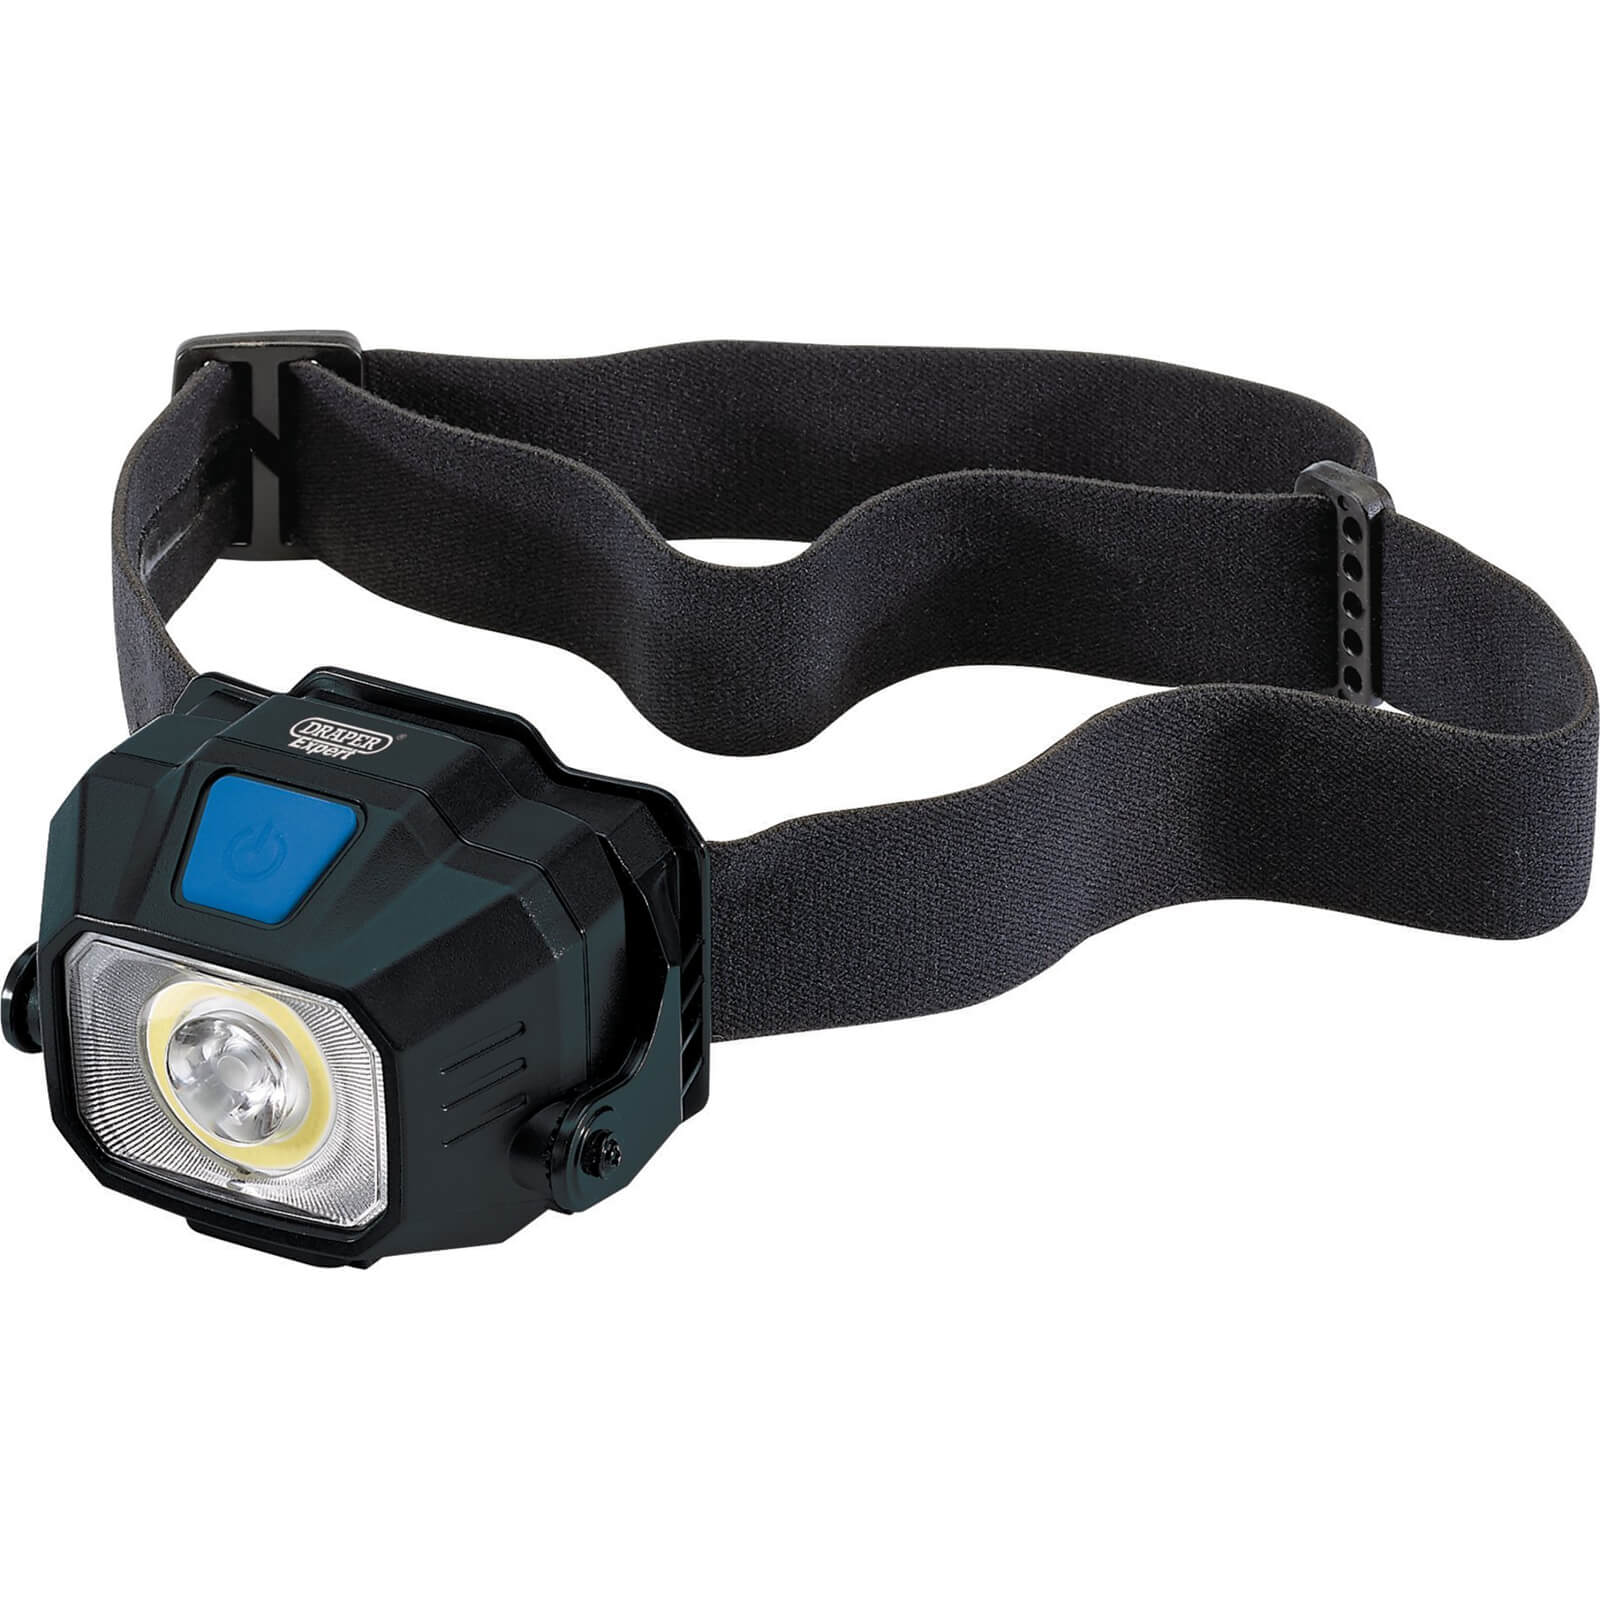 Image of Draper COB SMD LED Wireless/USB Rechargeable Head Torch Black